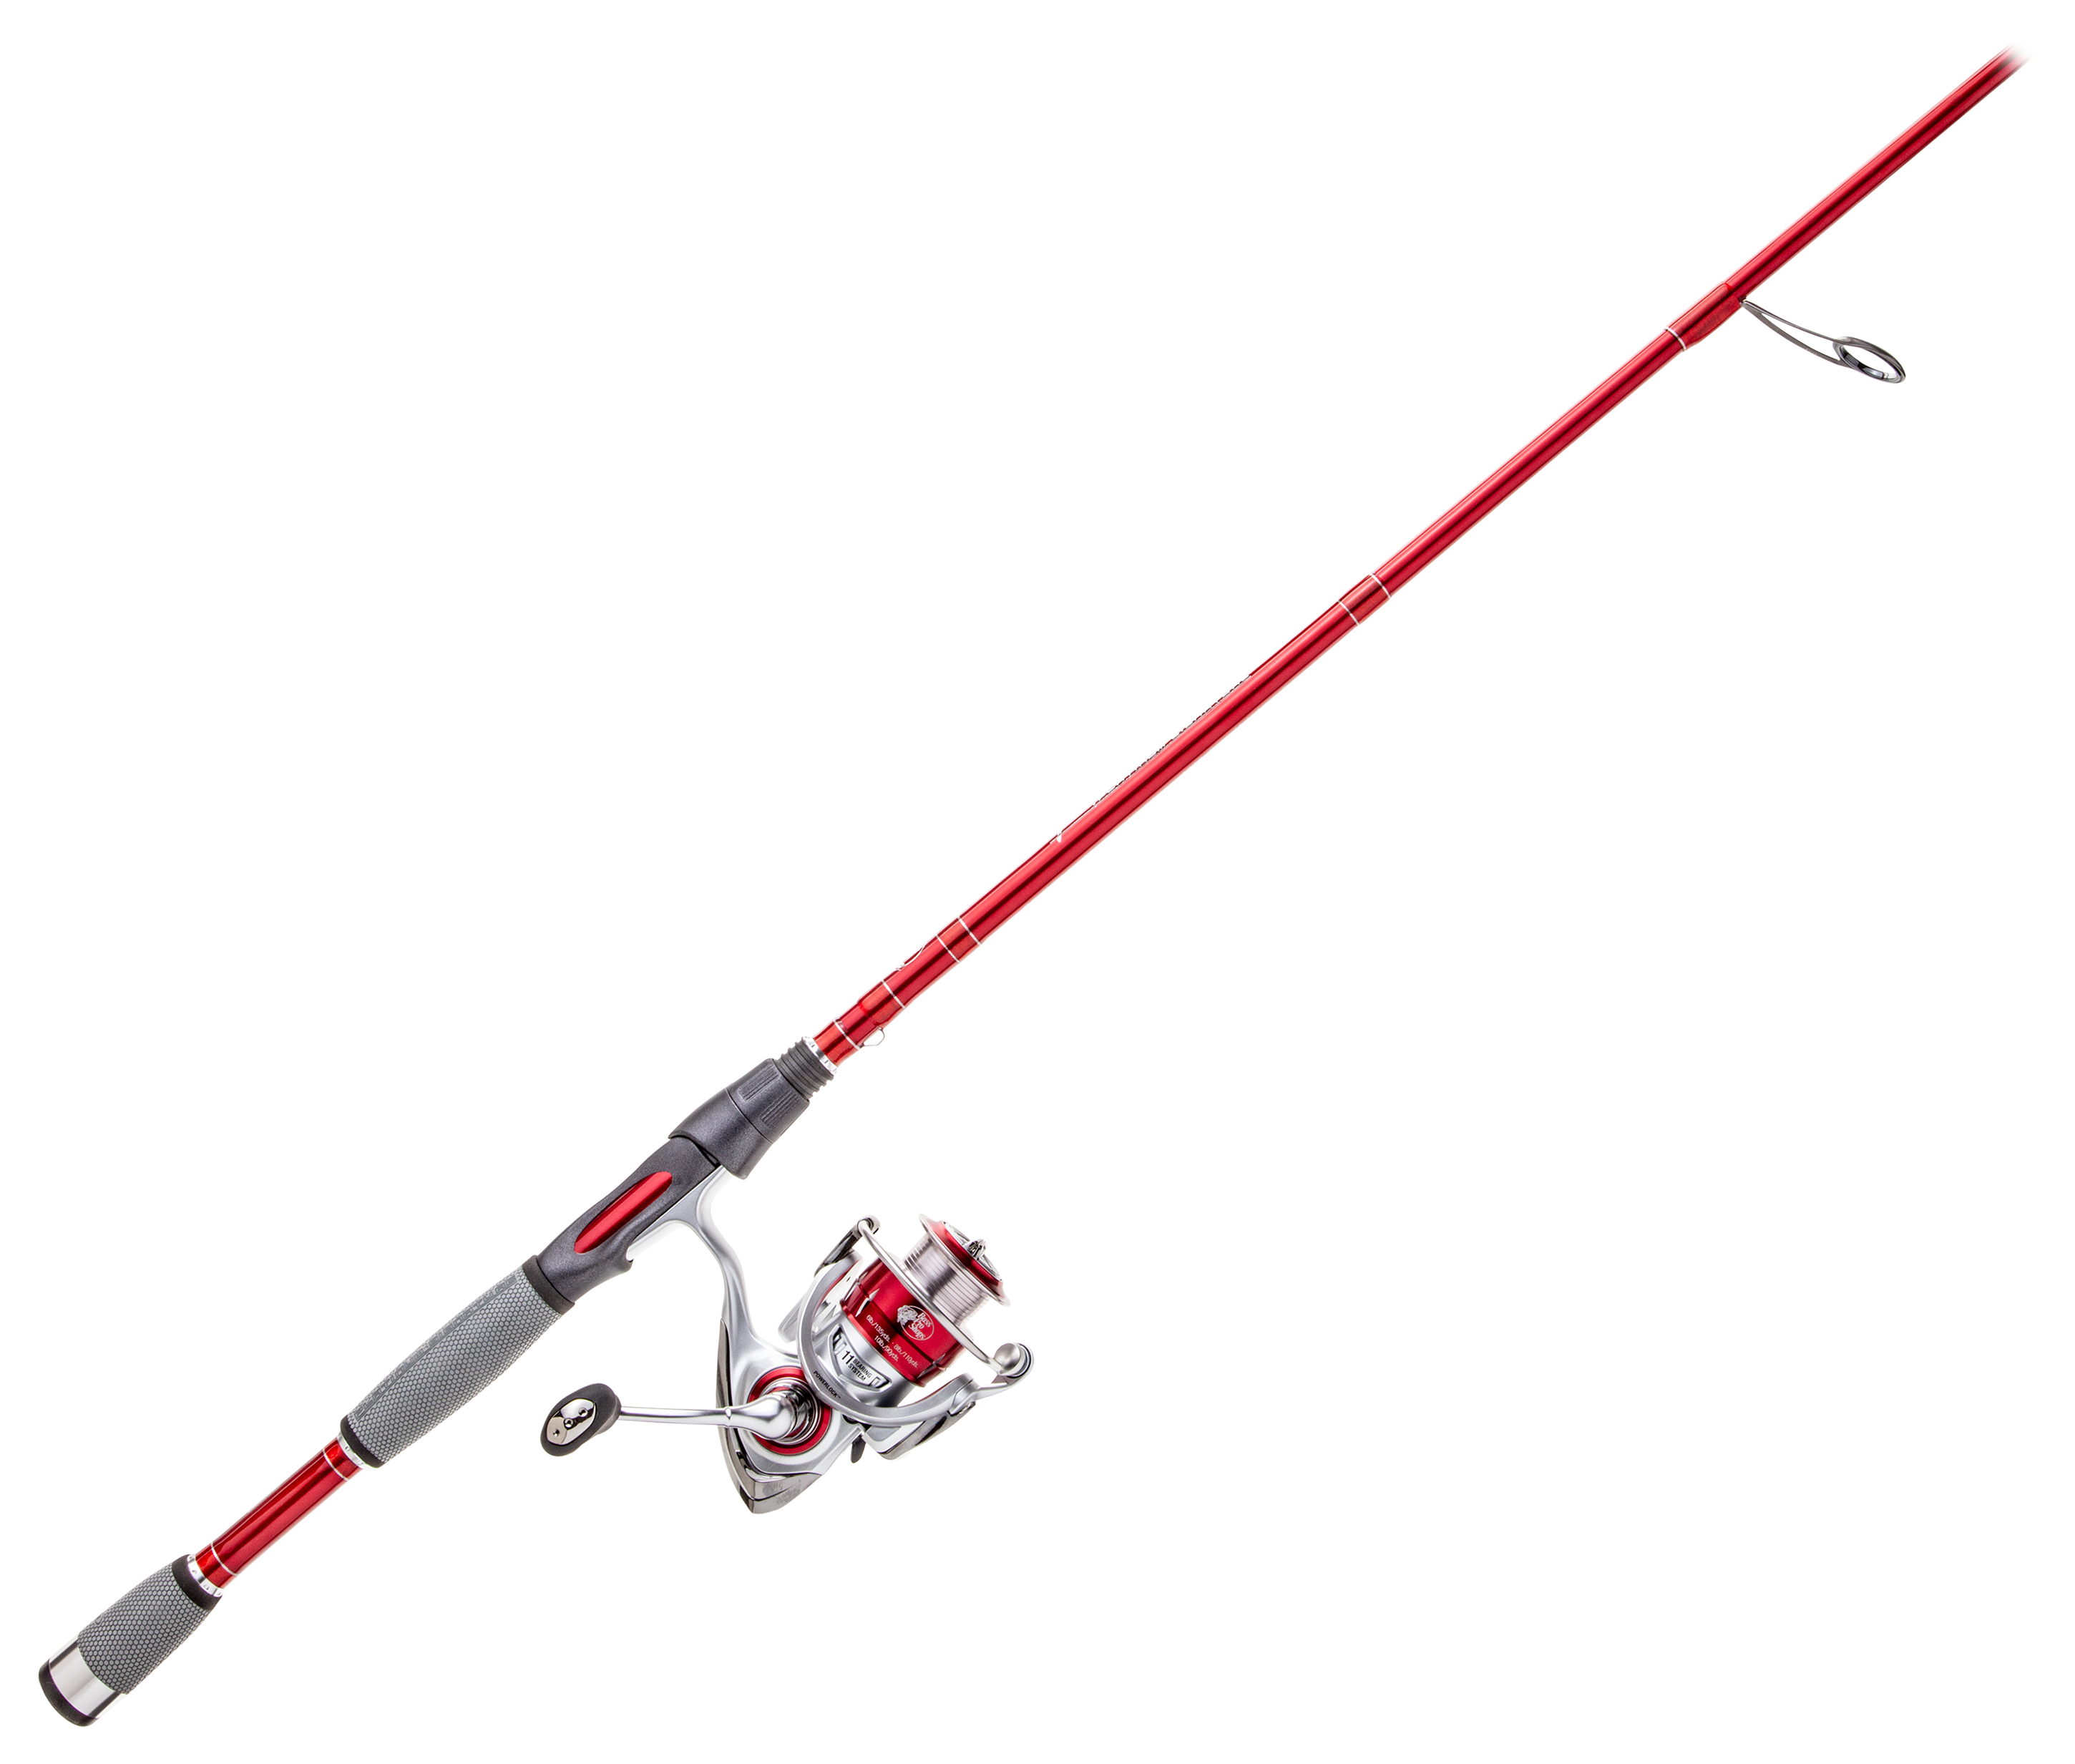 Bass Pro Shops Johnny Morris Platinum Signature Spinning Rod and Reel Combo - 2000 - 6 9  - Med Heavy - 6 0 1